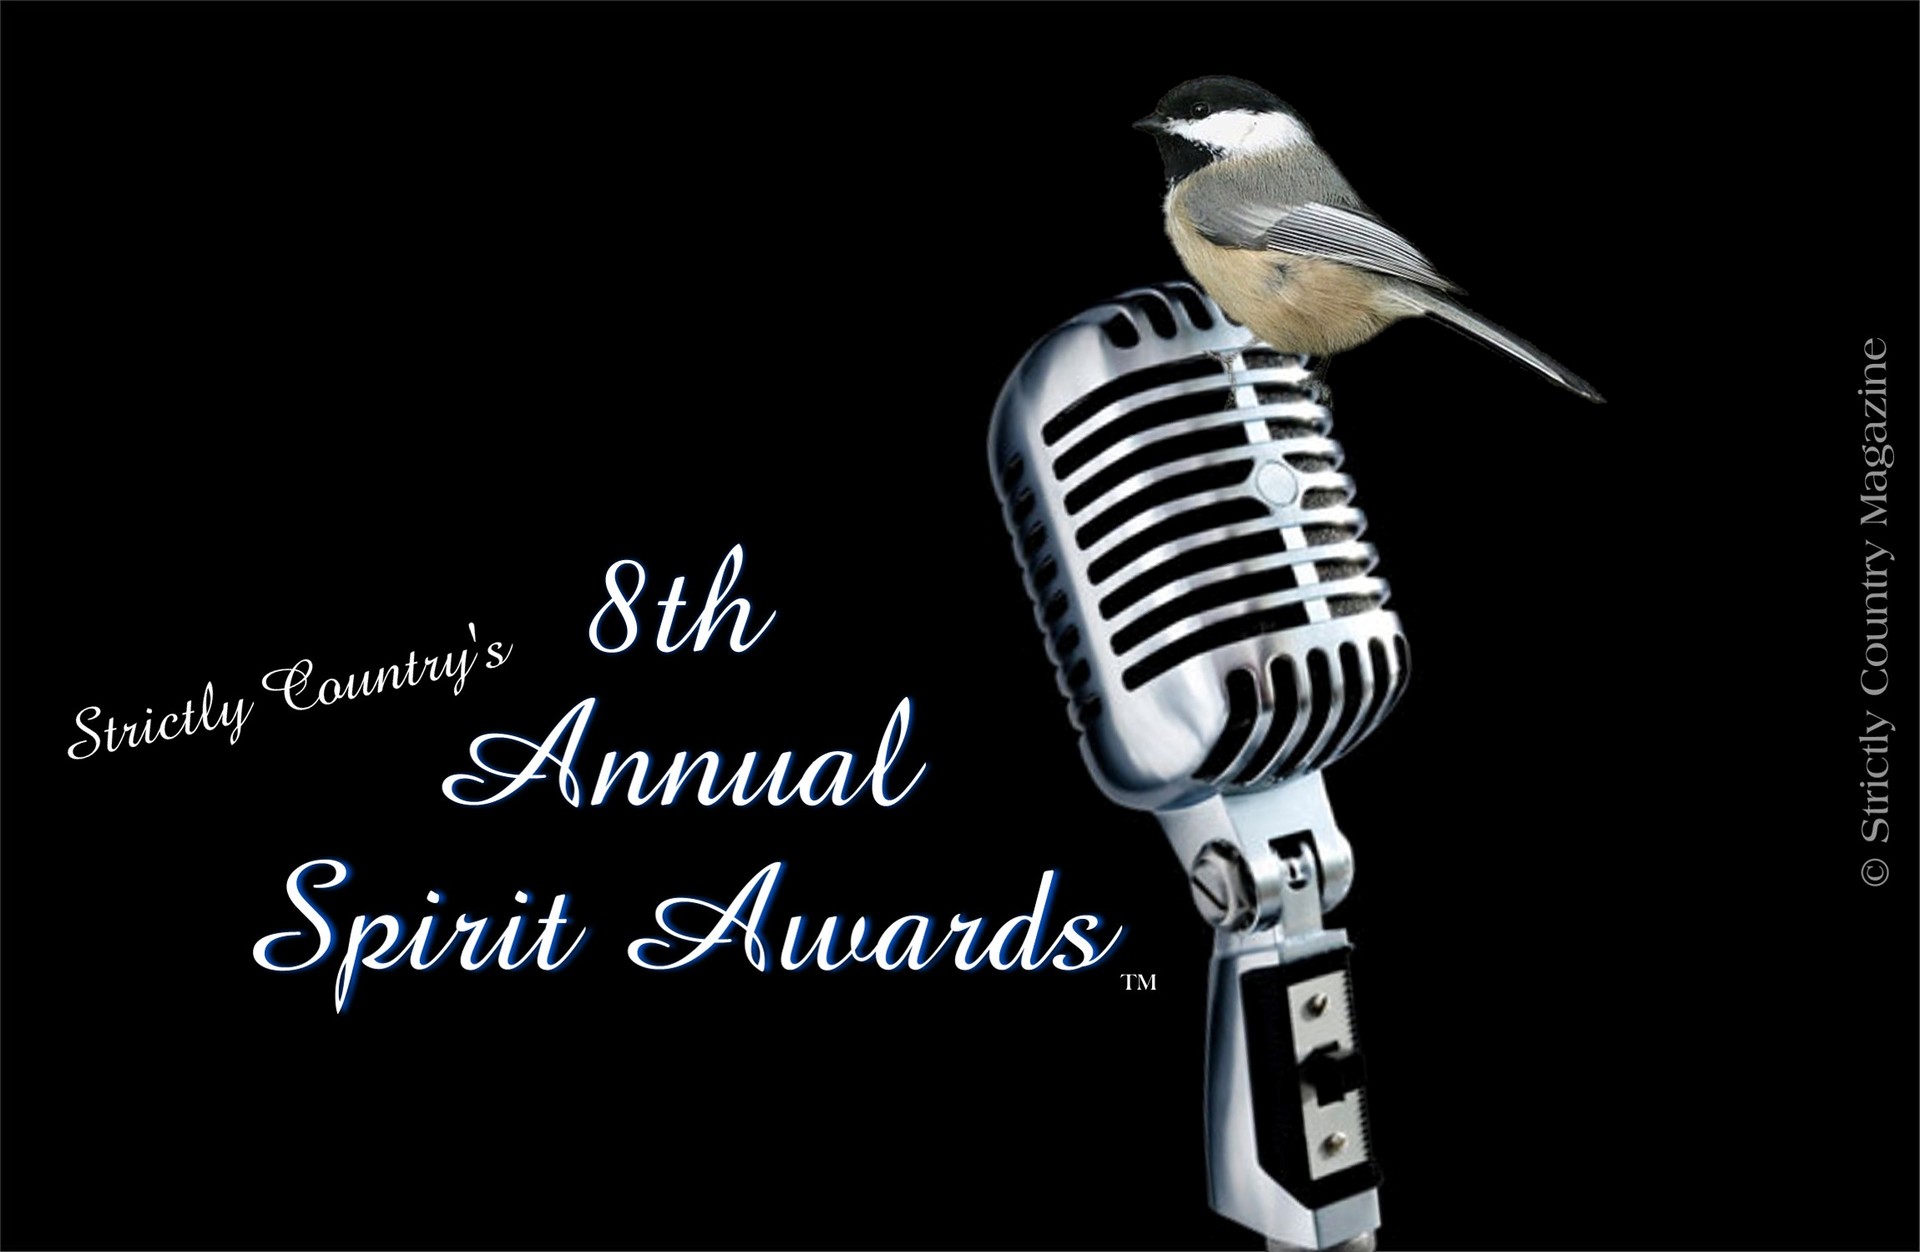 Strictly Country Magazine copyright 8th Annual Spirit Awards official logo